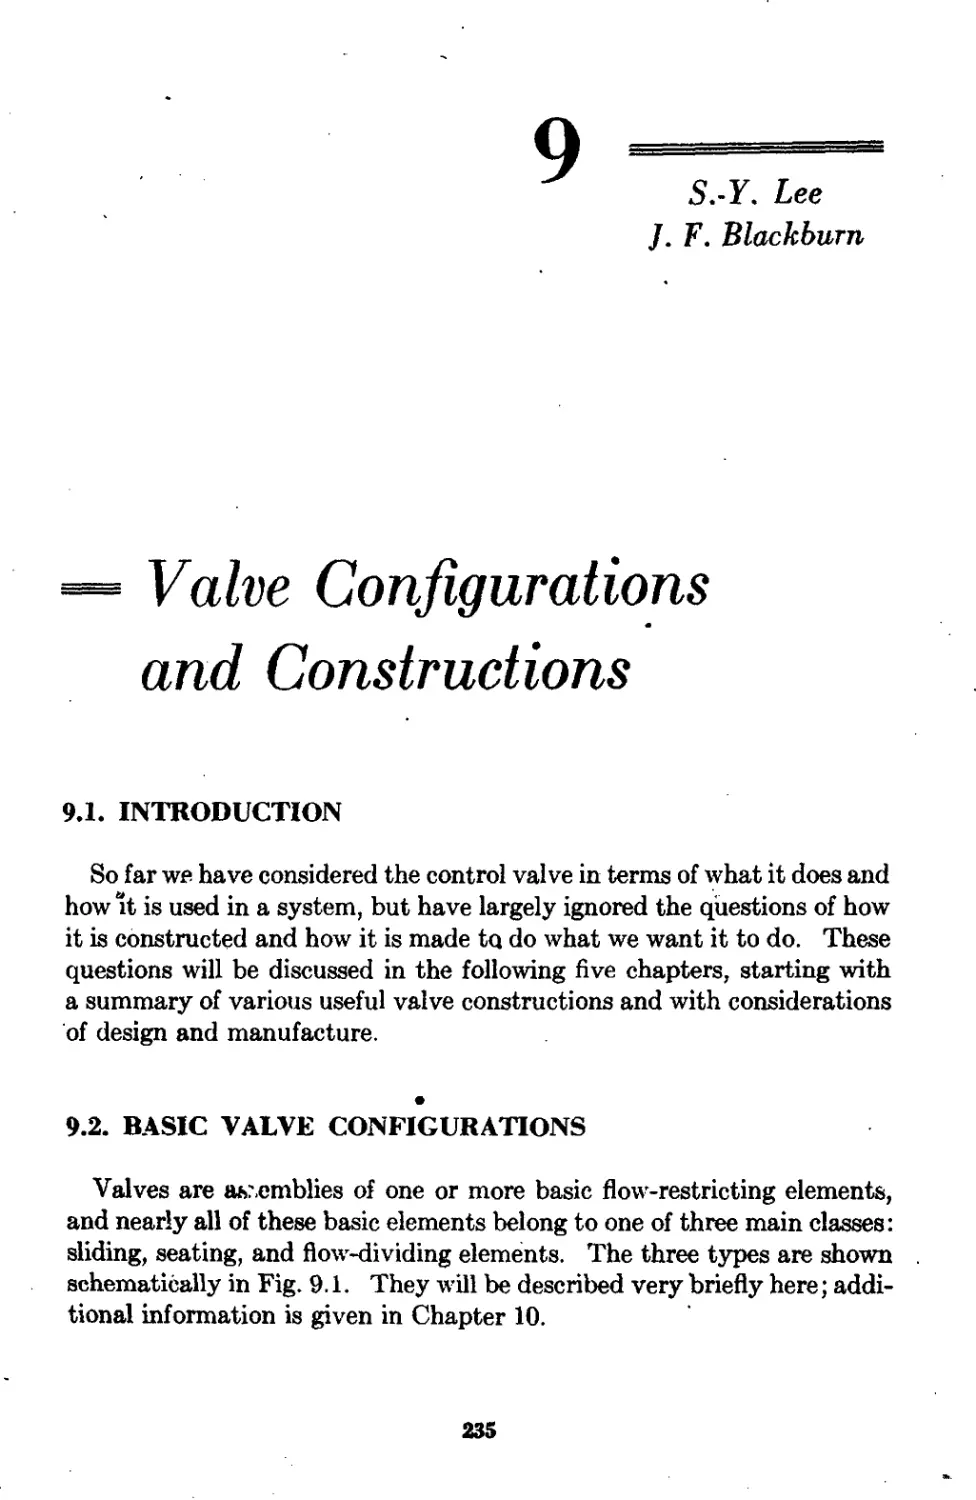 Chapter 9 Valve Configurations and Constructions: S.-Y. Lee and J. F. Blackburn
9.2 Basic Valve Configurations